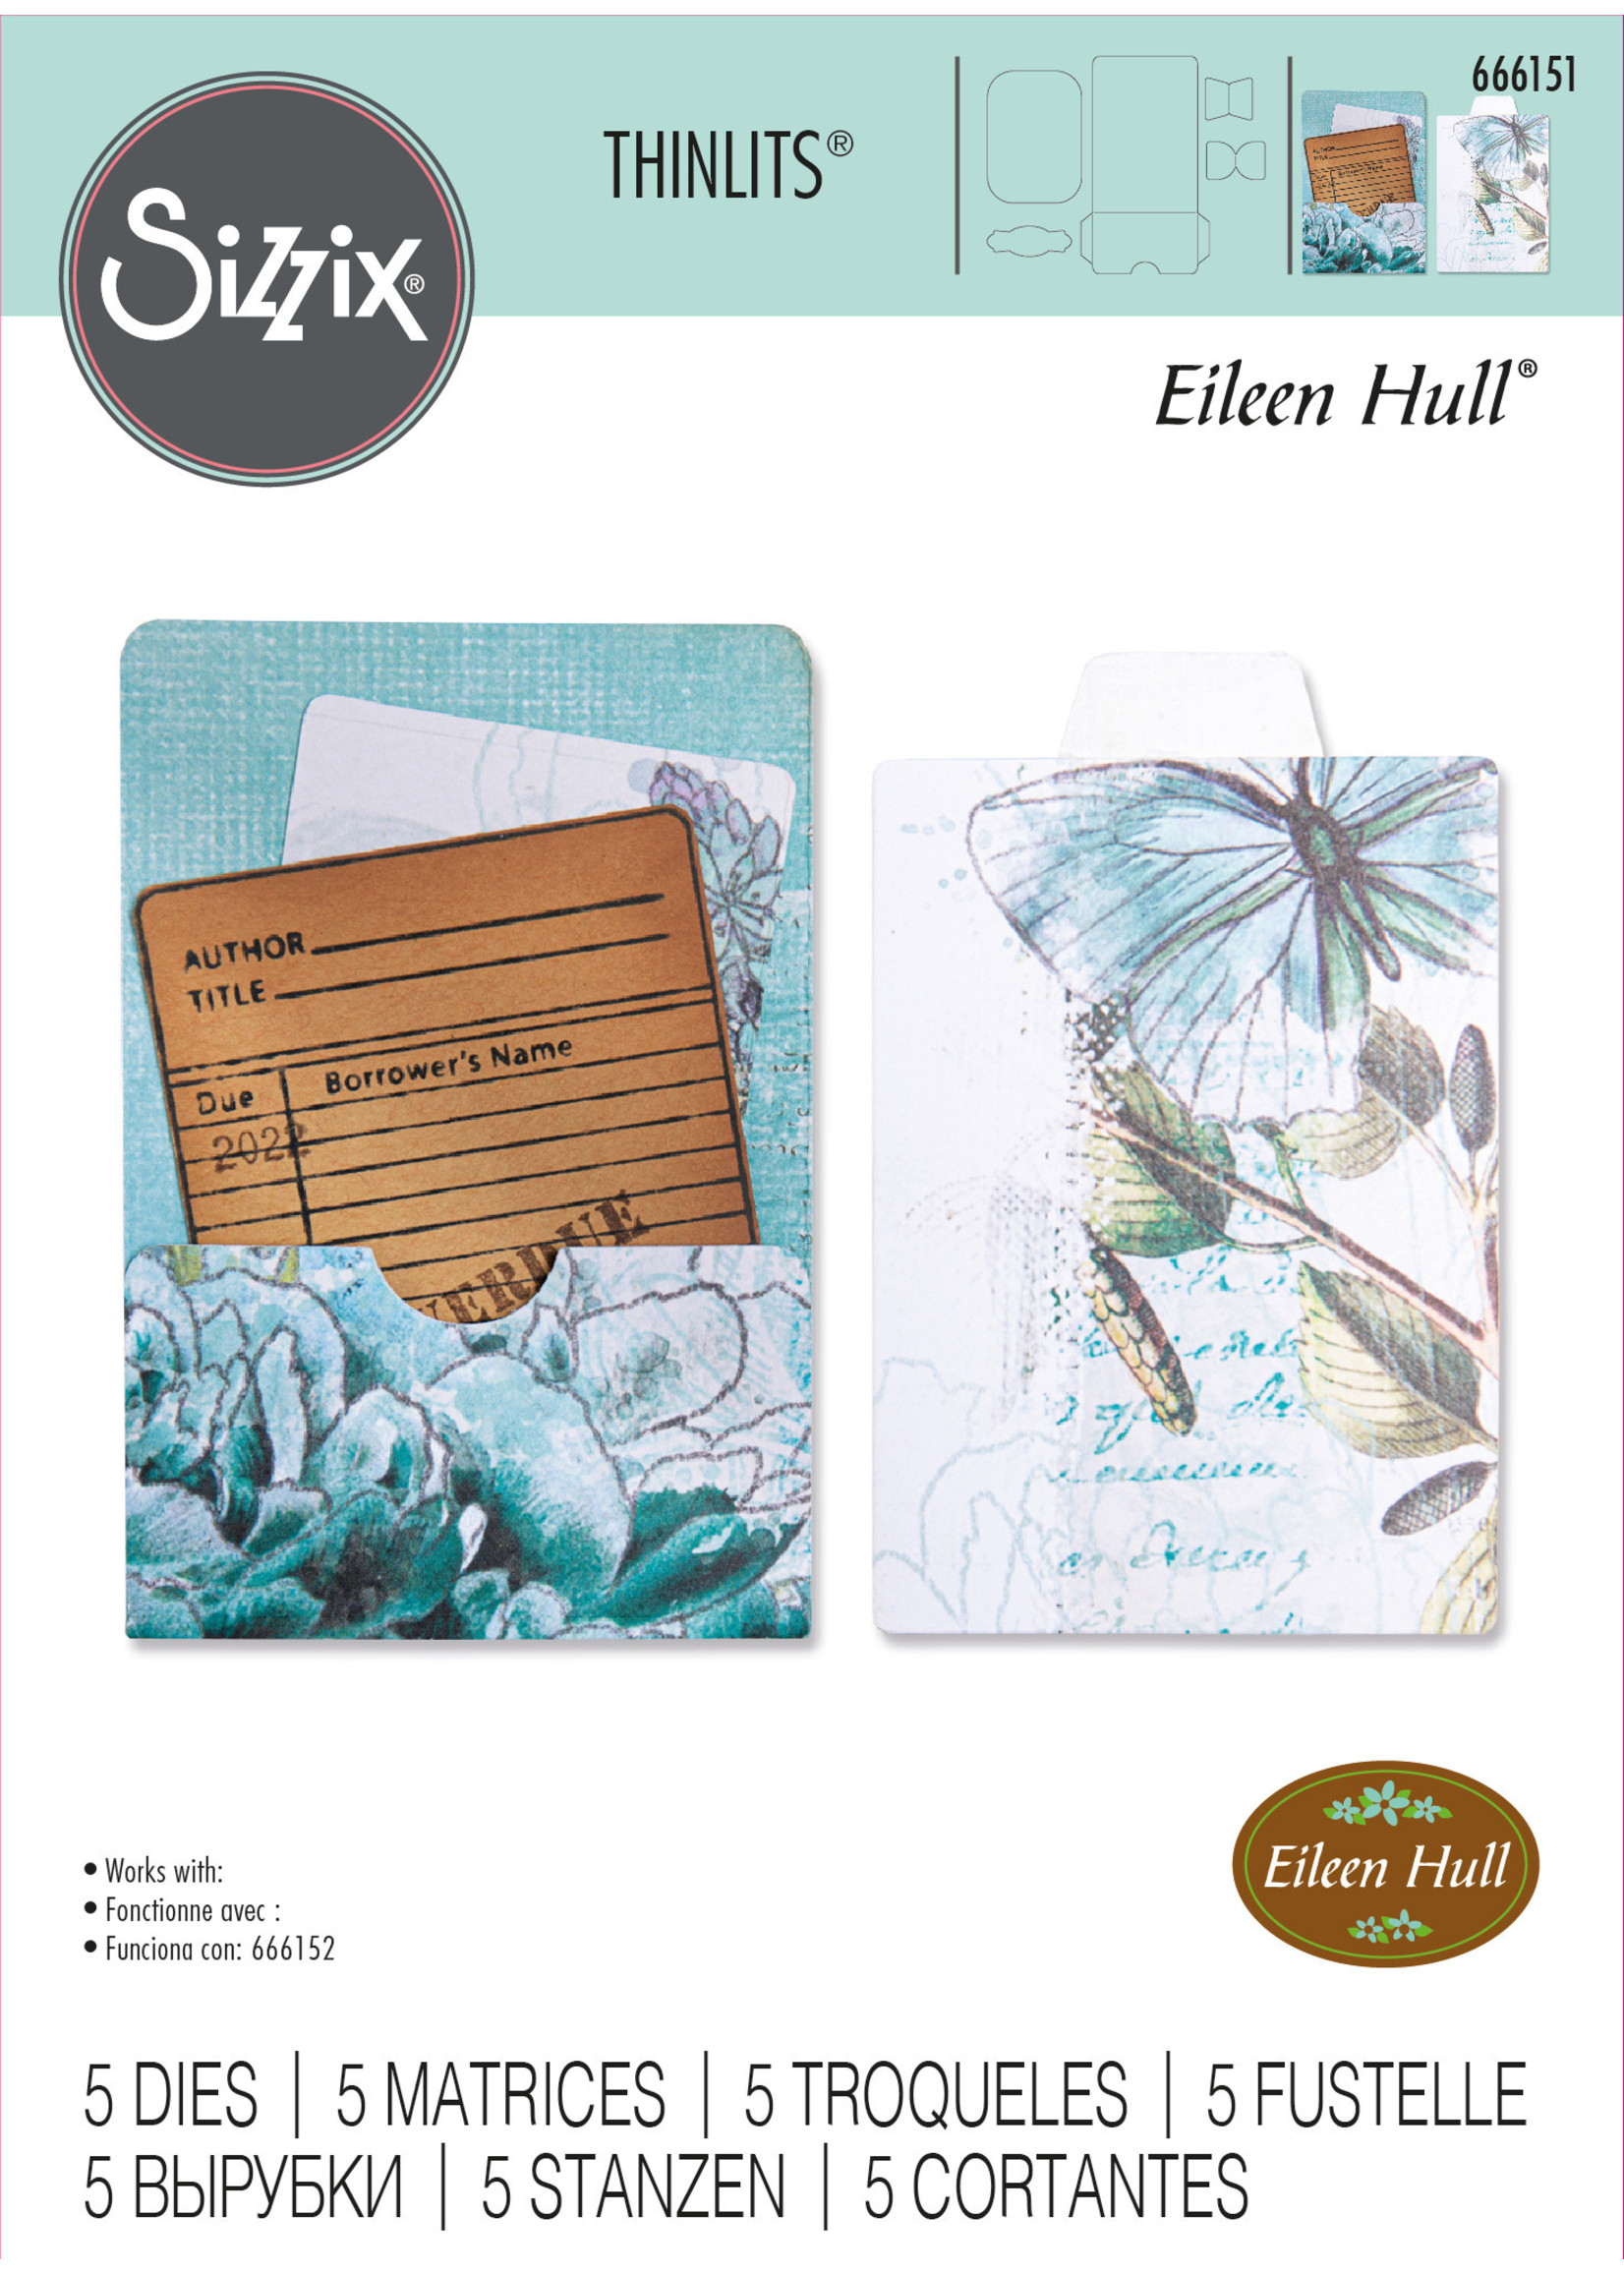 Sizzix Sizzix® Thinlits® Die Set 5PK - Library Pocket, ATC Card & Tabs by Eileen Hull®